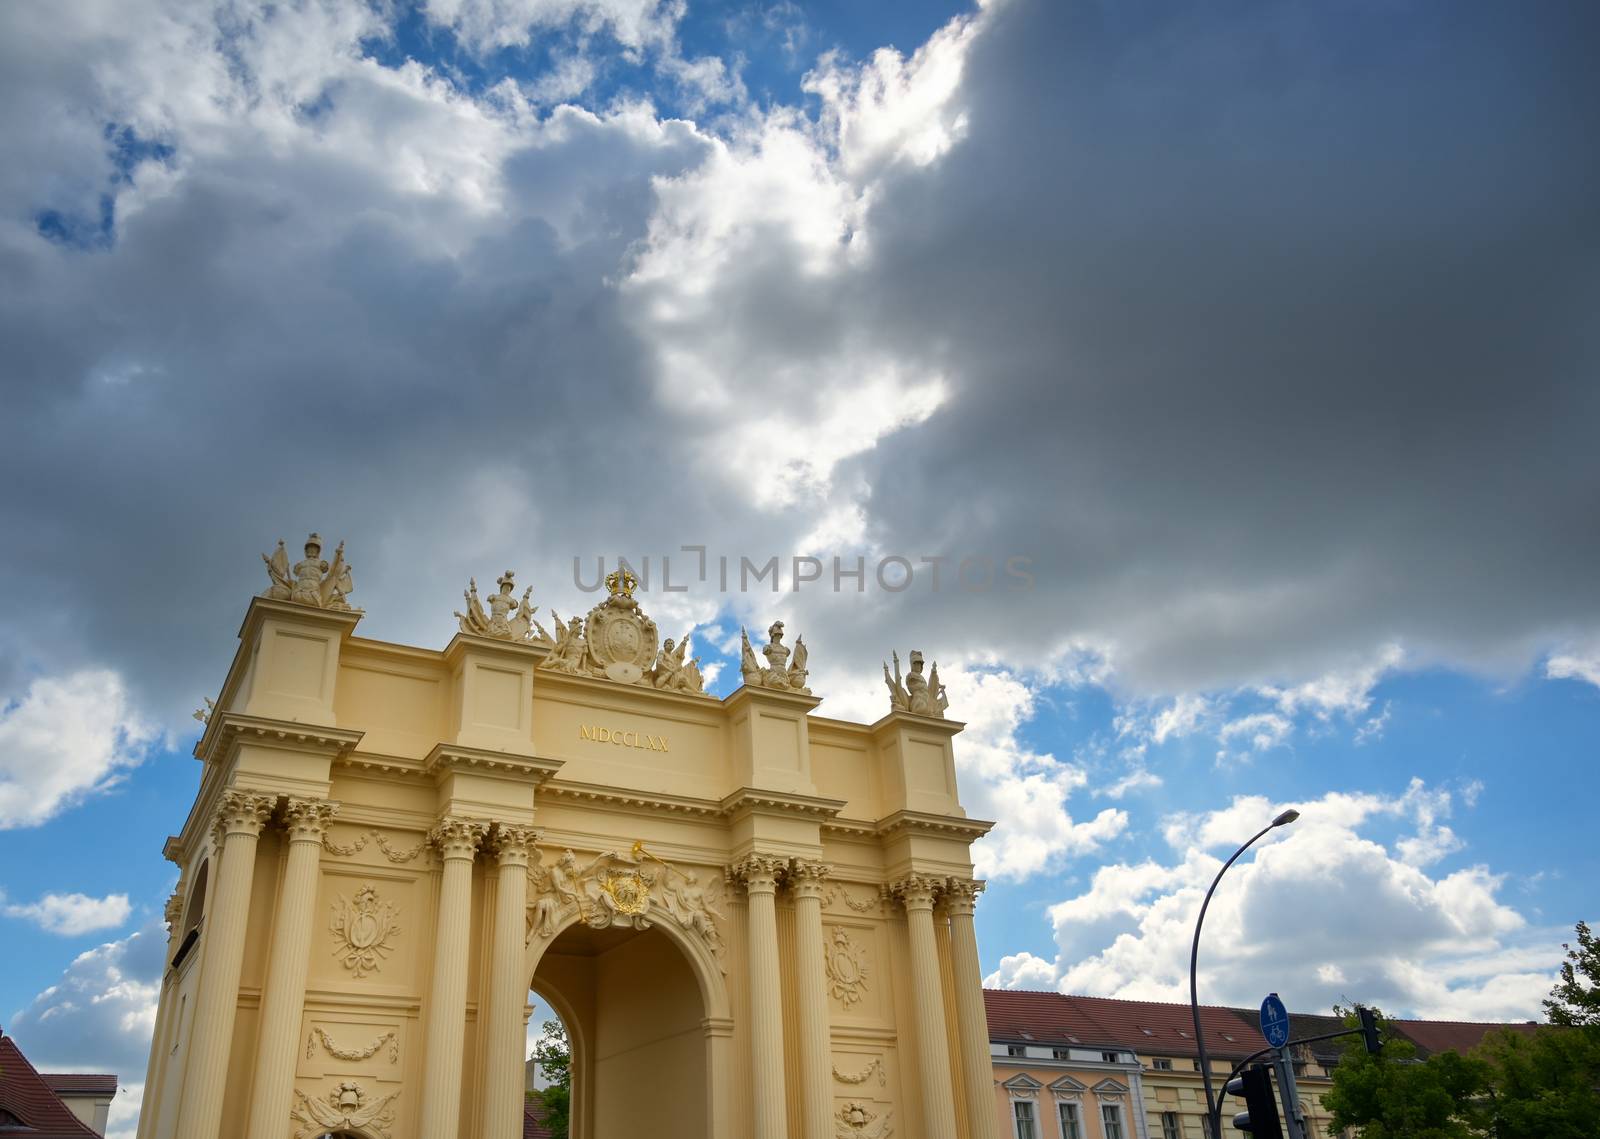 A view of Brandenburg Gate located in Potsdam, Germany.